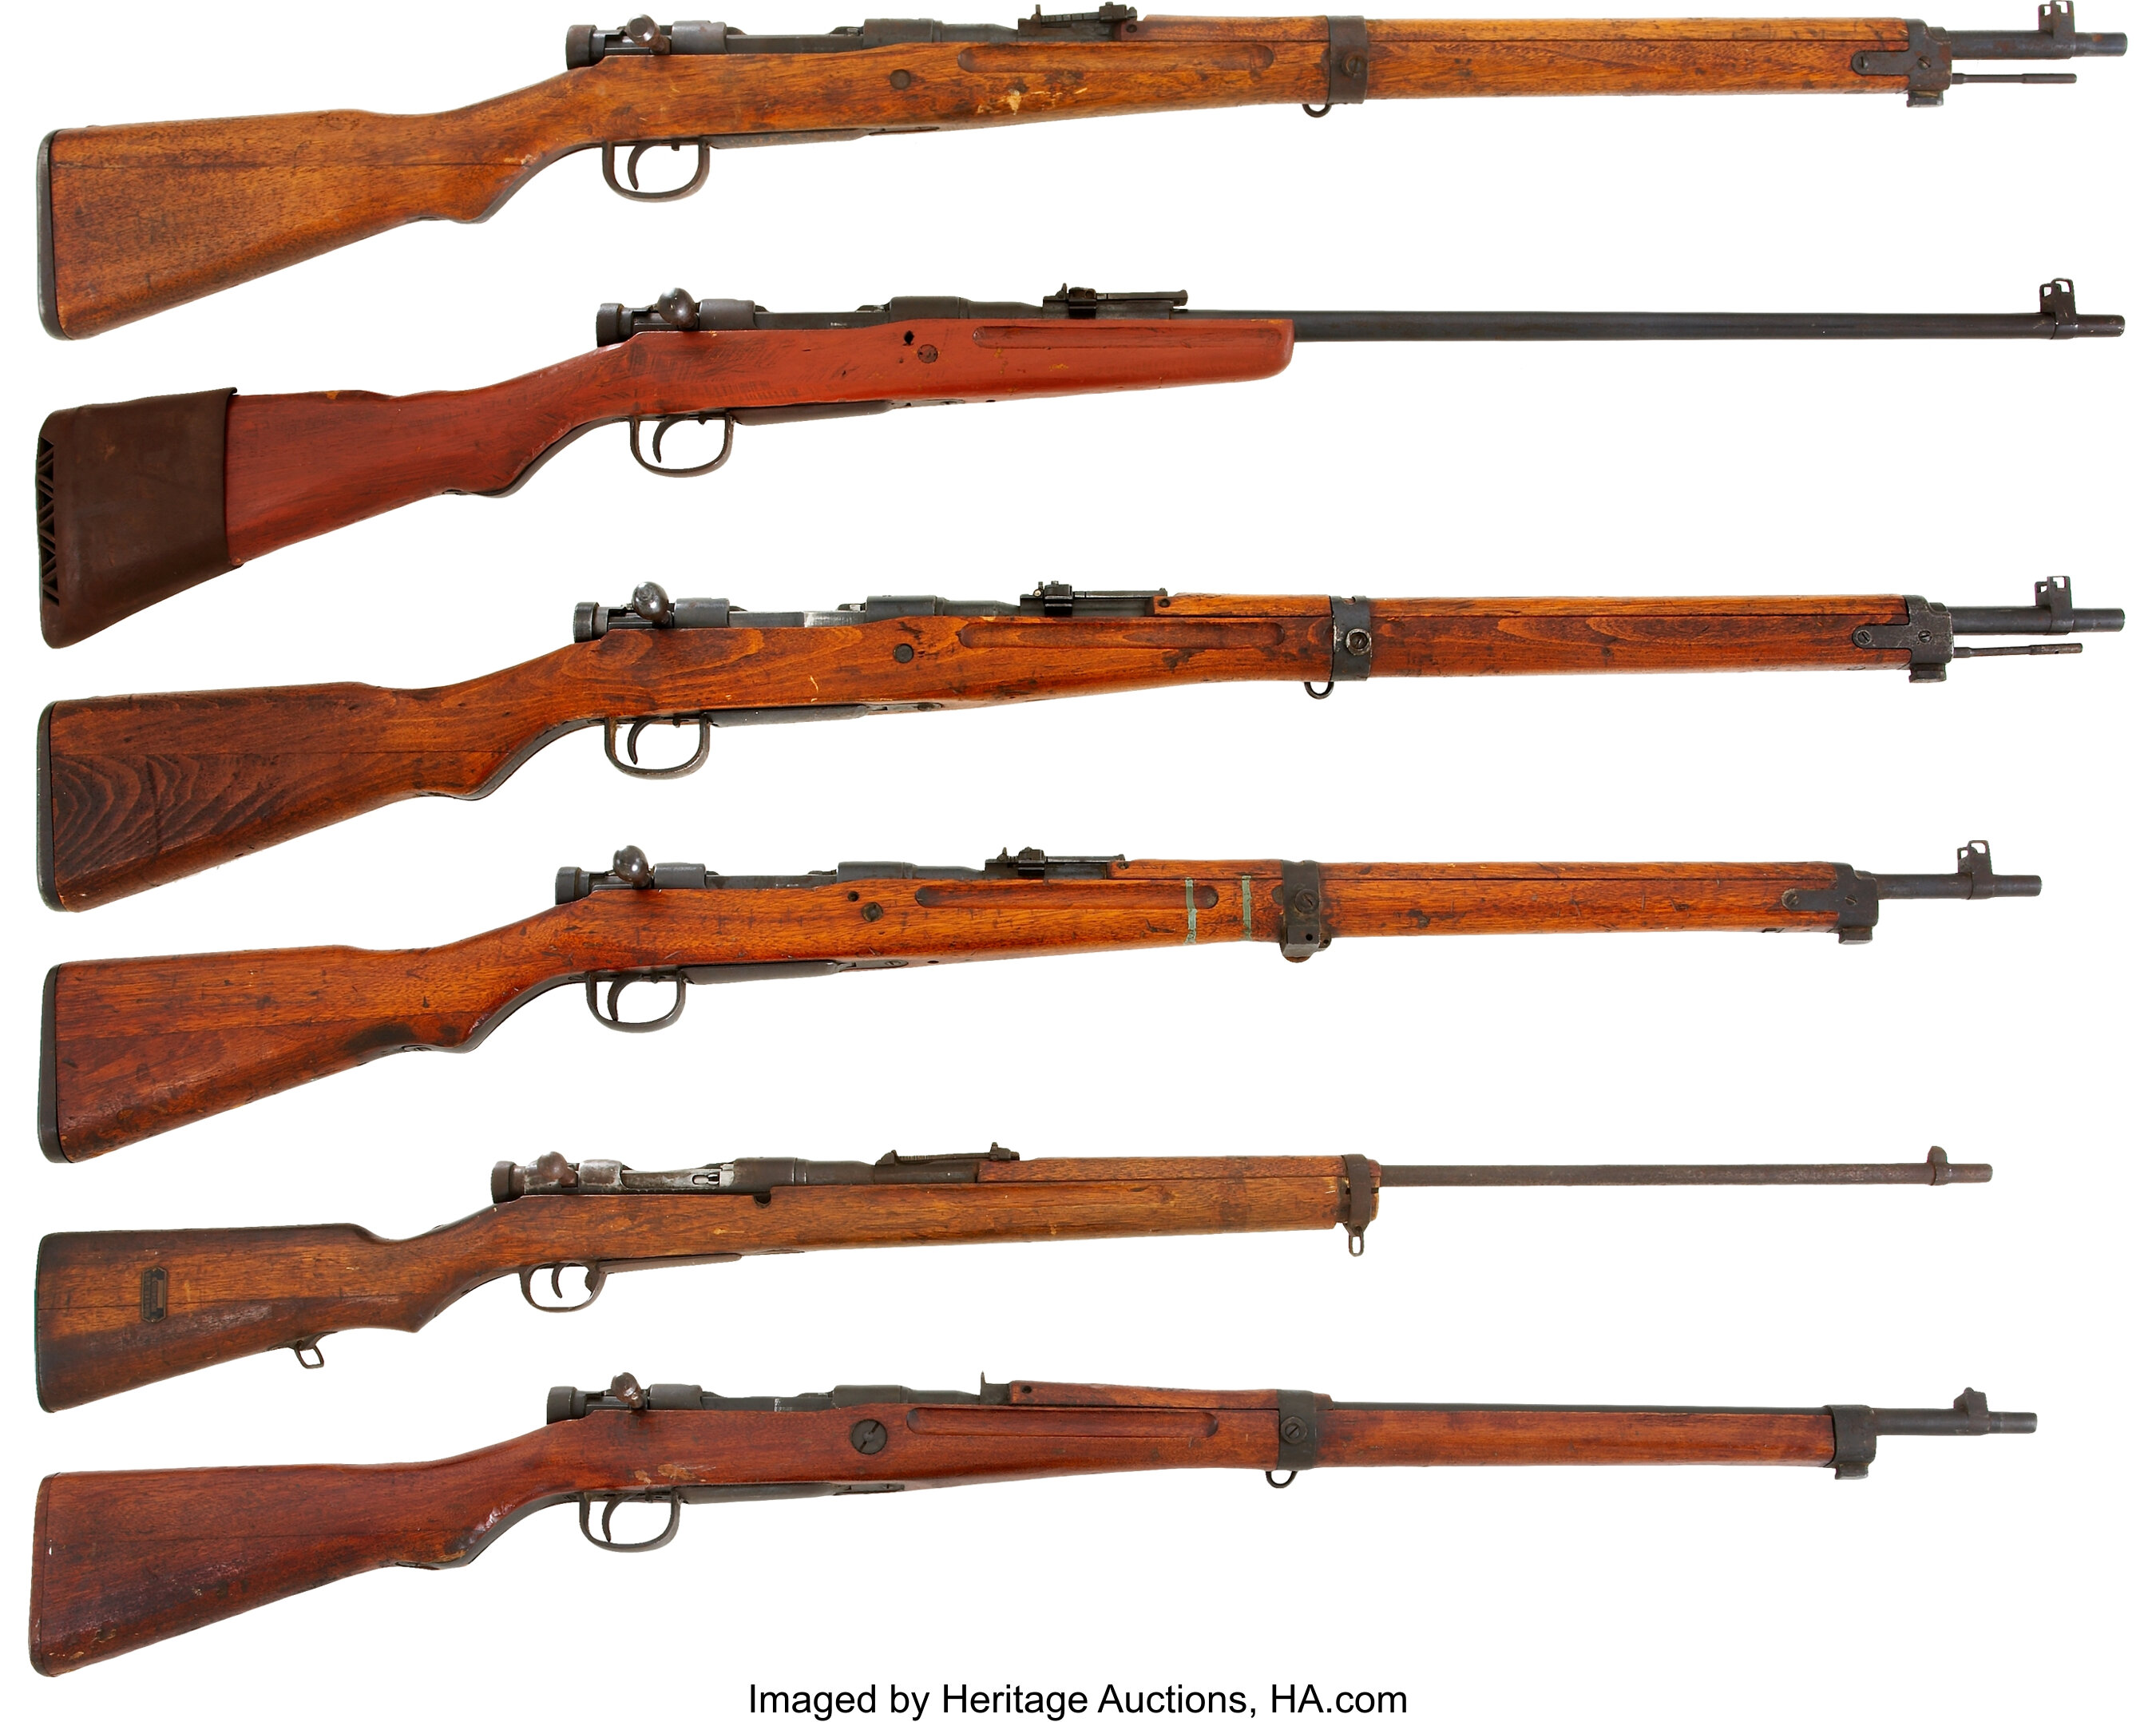 Group Of Six Japanese Wwii Type 99 Bolt Action Rifles Total 6 Lot 527 Heritage Auctions